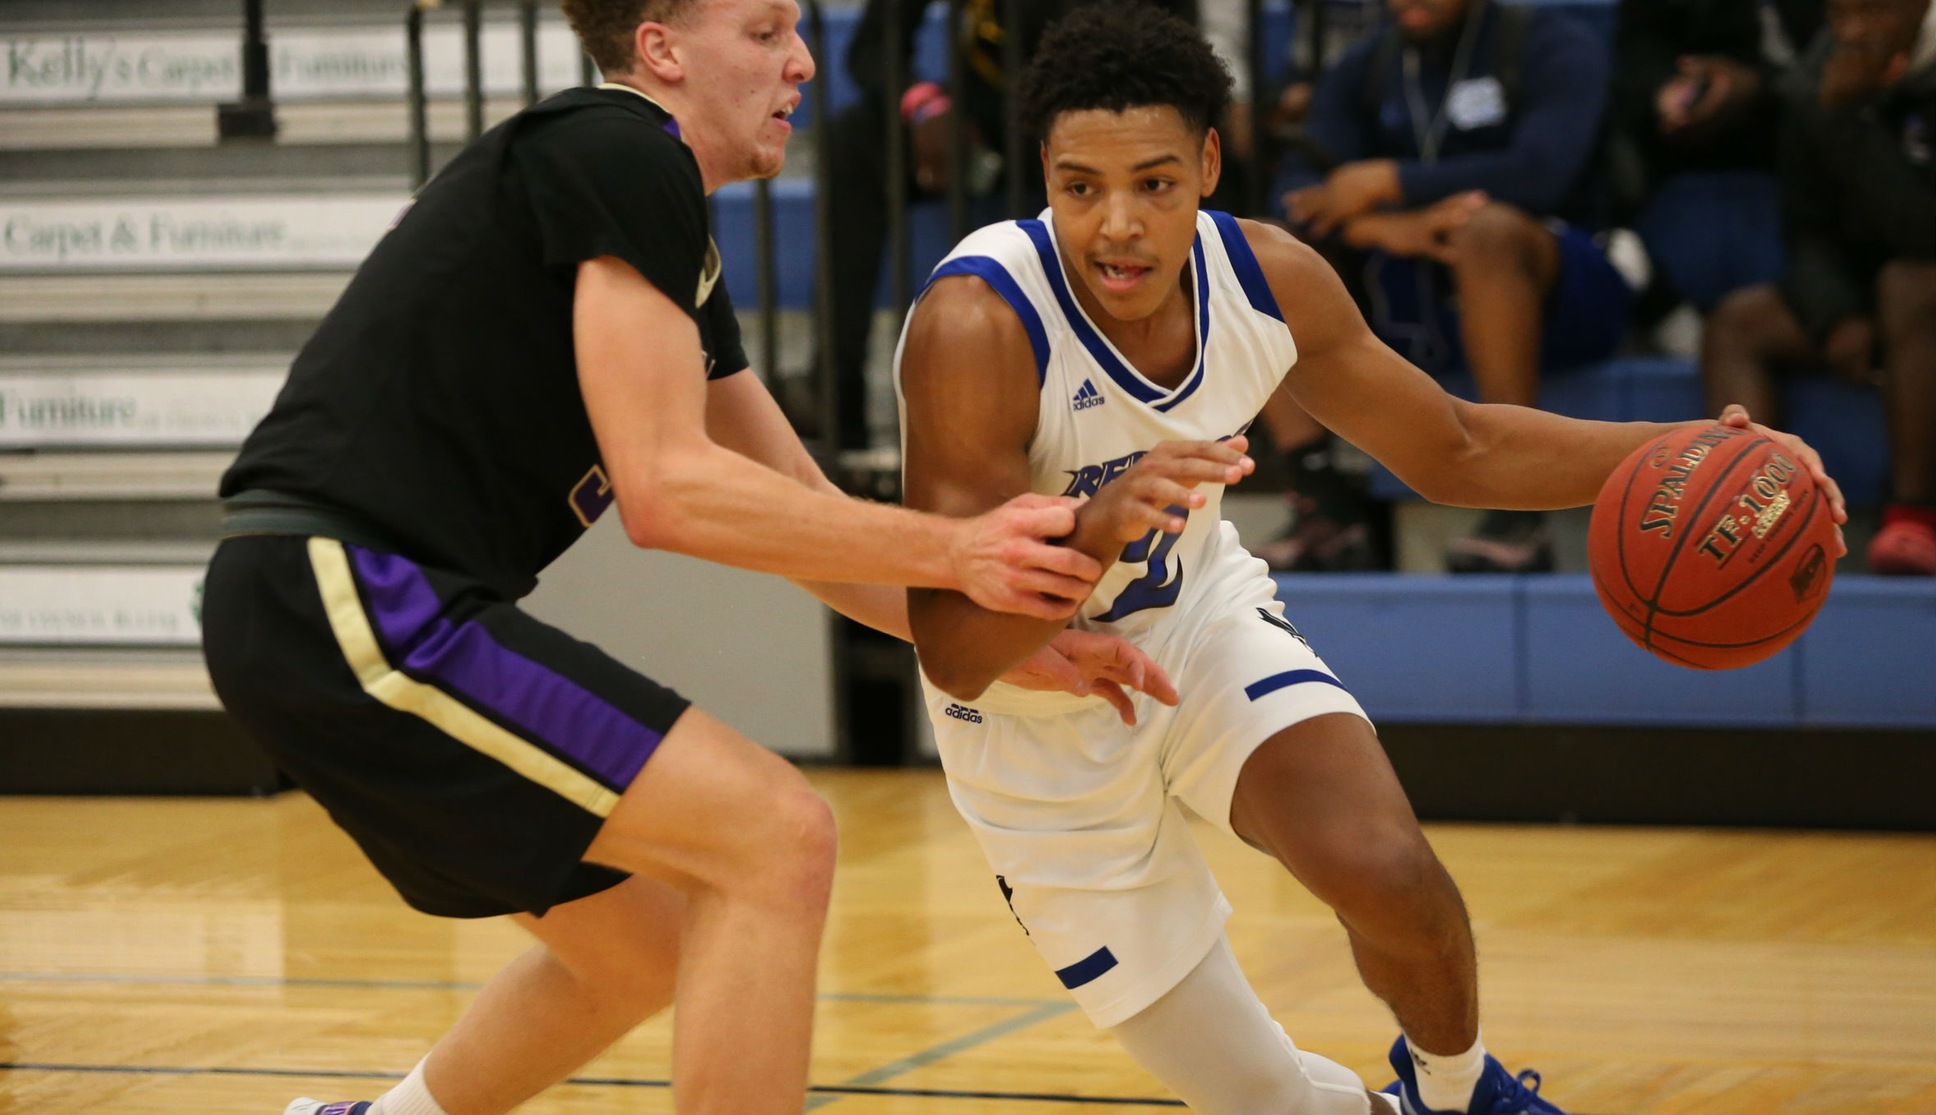 Jo Strong's (pictured) 28pts; along with Caleb Huffman's 27pts, led the Reivers to a 95-79 victory over previously 10-2 Southeast Tuesday (12/10) night.